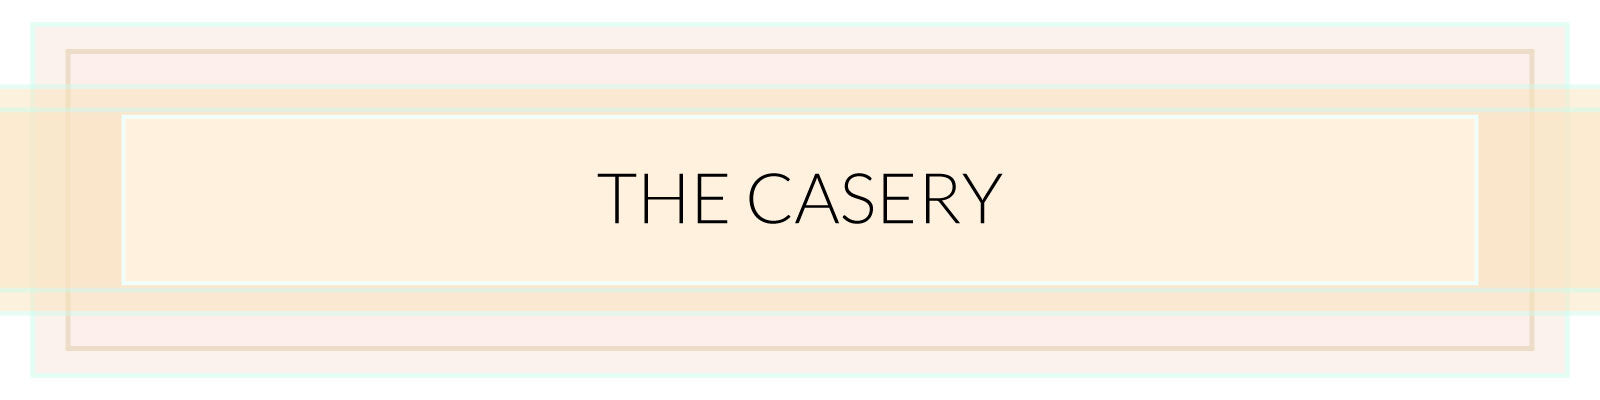 The Casery